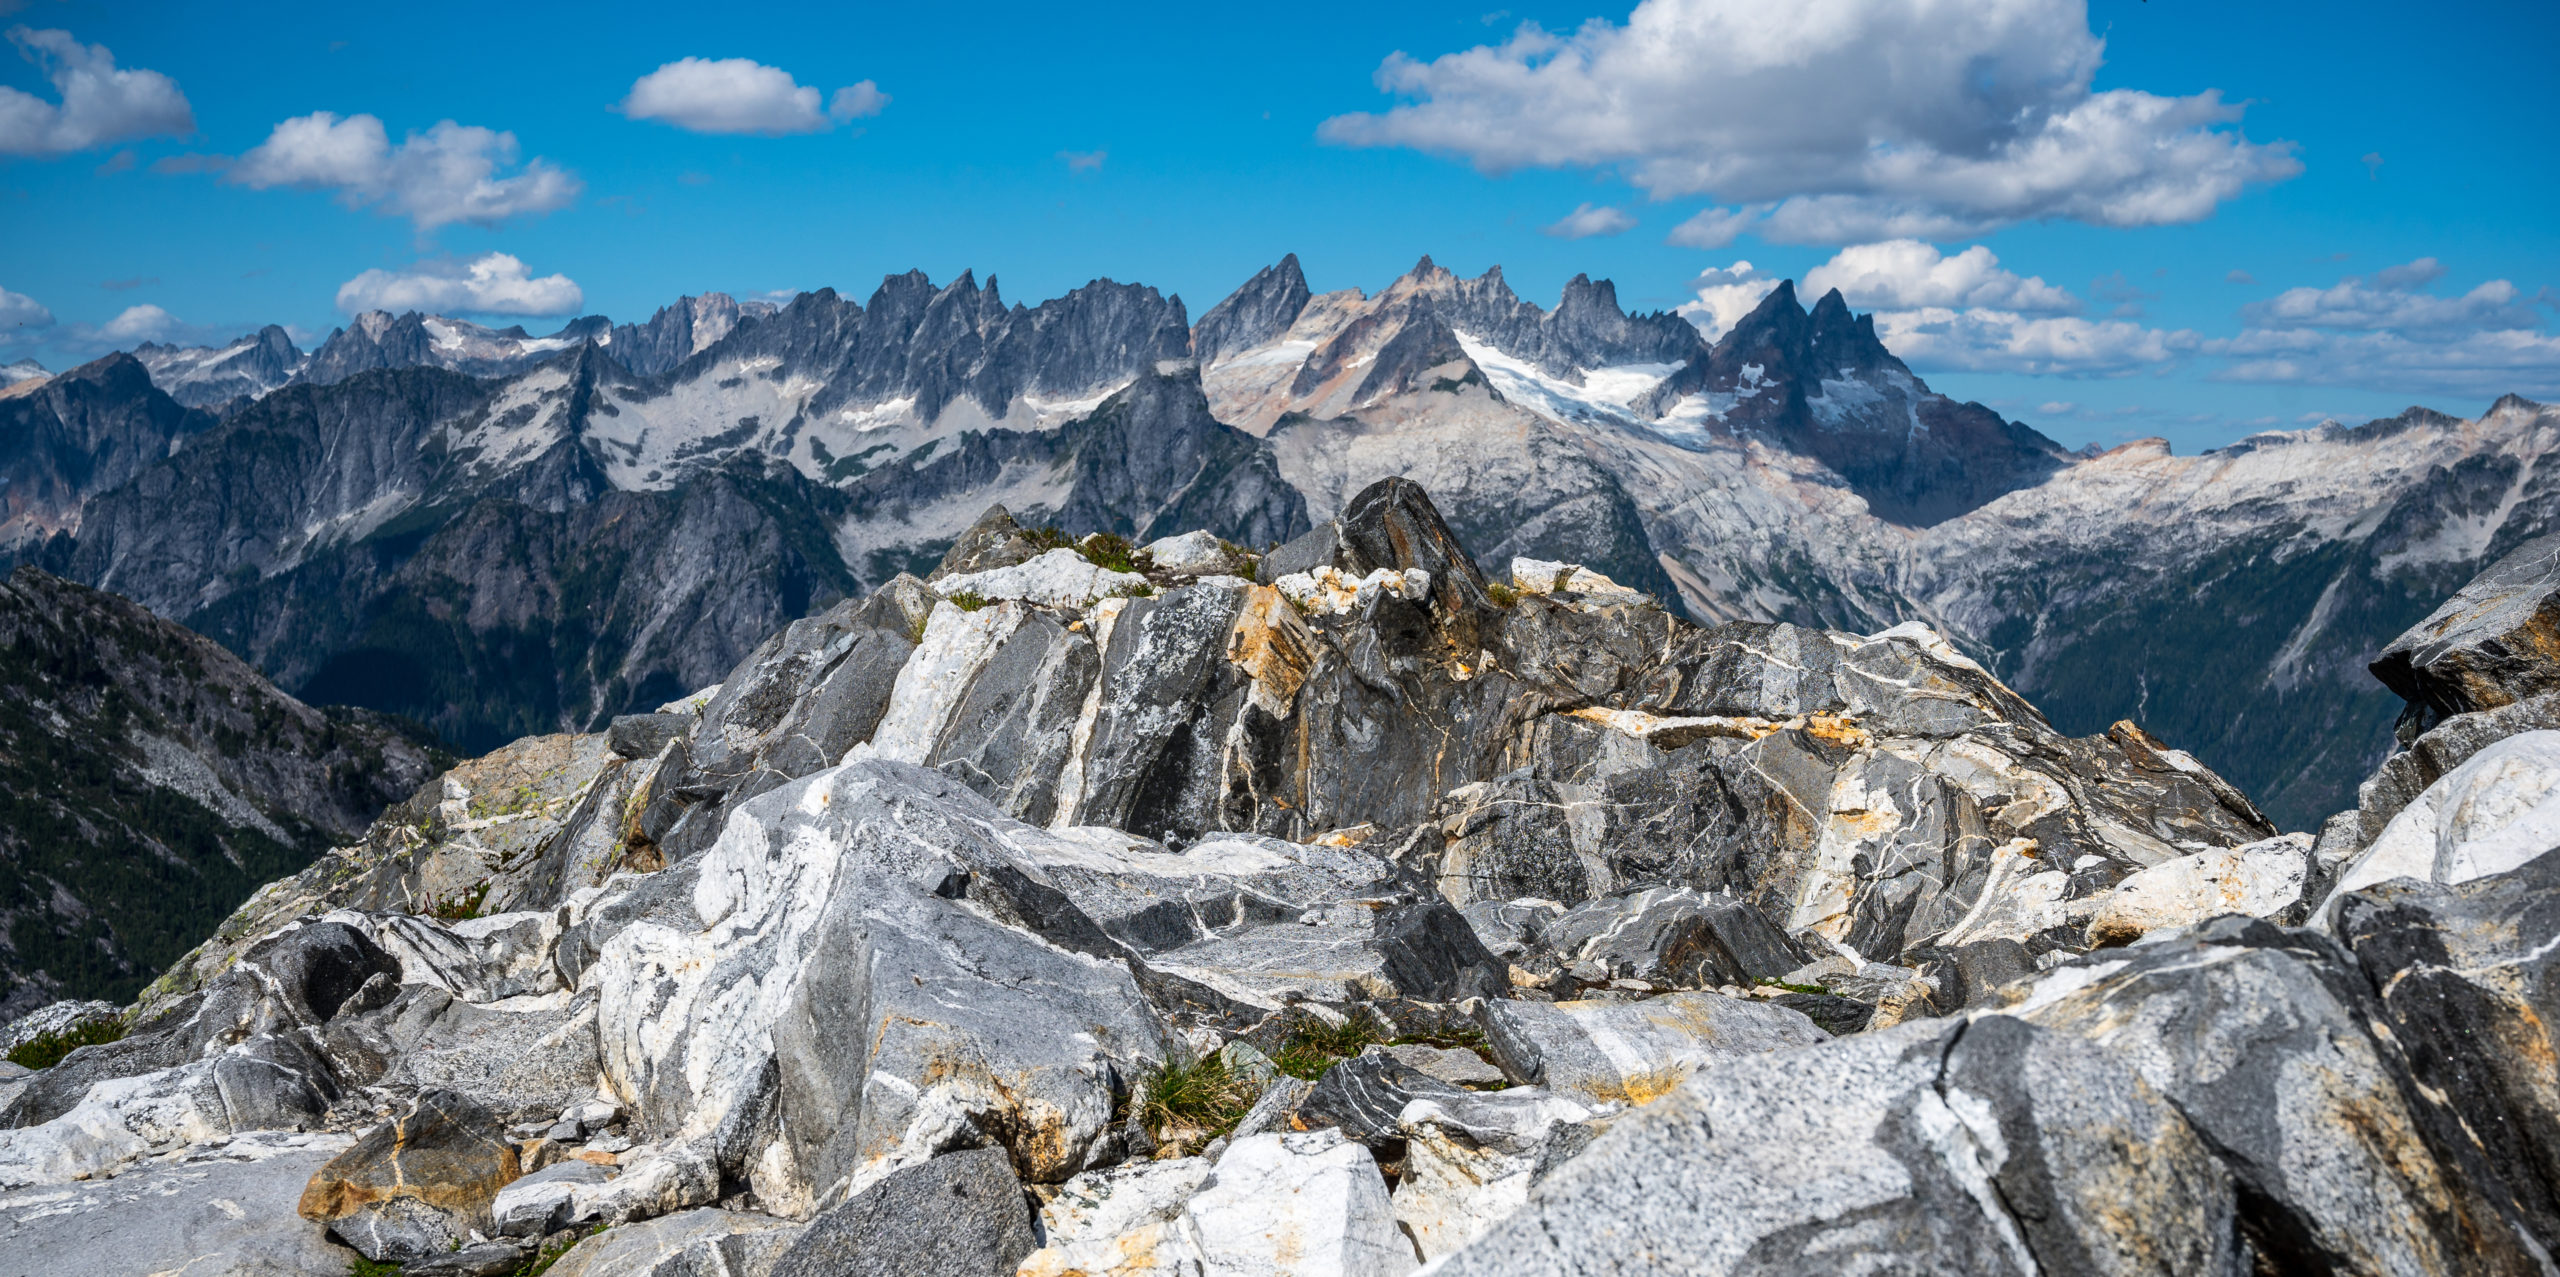 View from Trapper Peak, North Cascades National Park, Washington